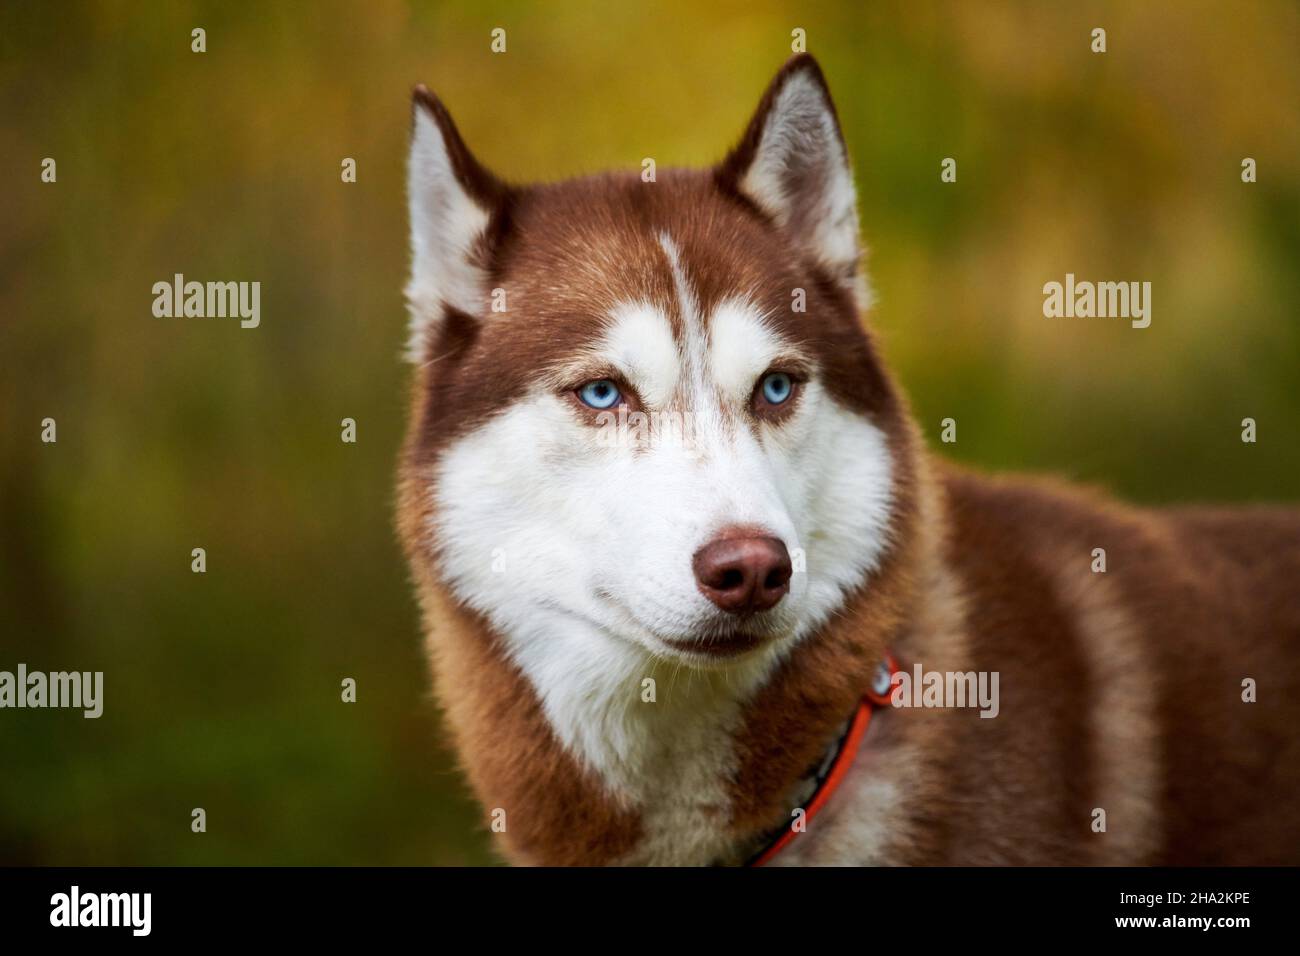 Siberian Husky dog with beautiful blue eyes in collar, blurred green background. Siberian Husky face with ginger and white coat color, sled dog breed Stock Photo Alamy